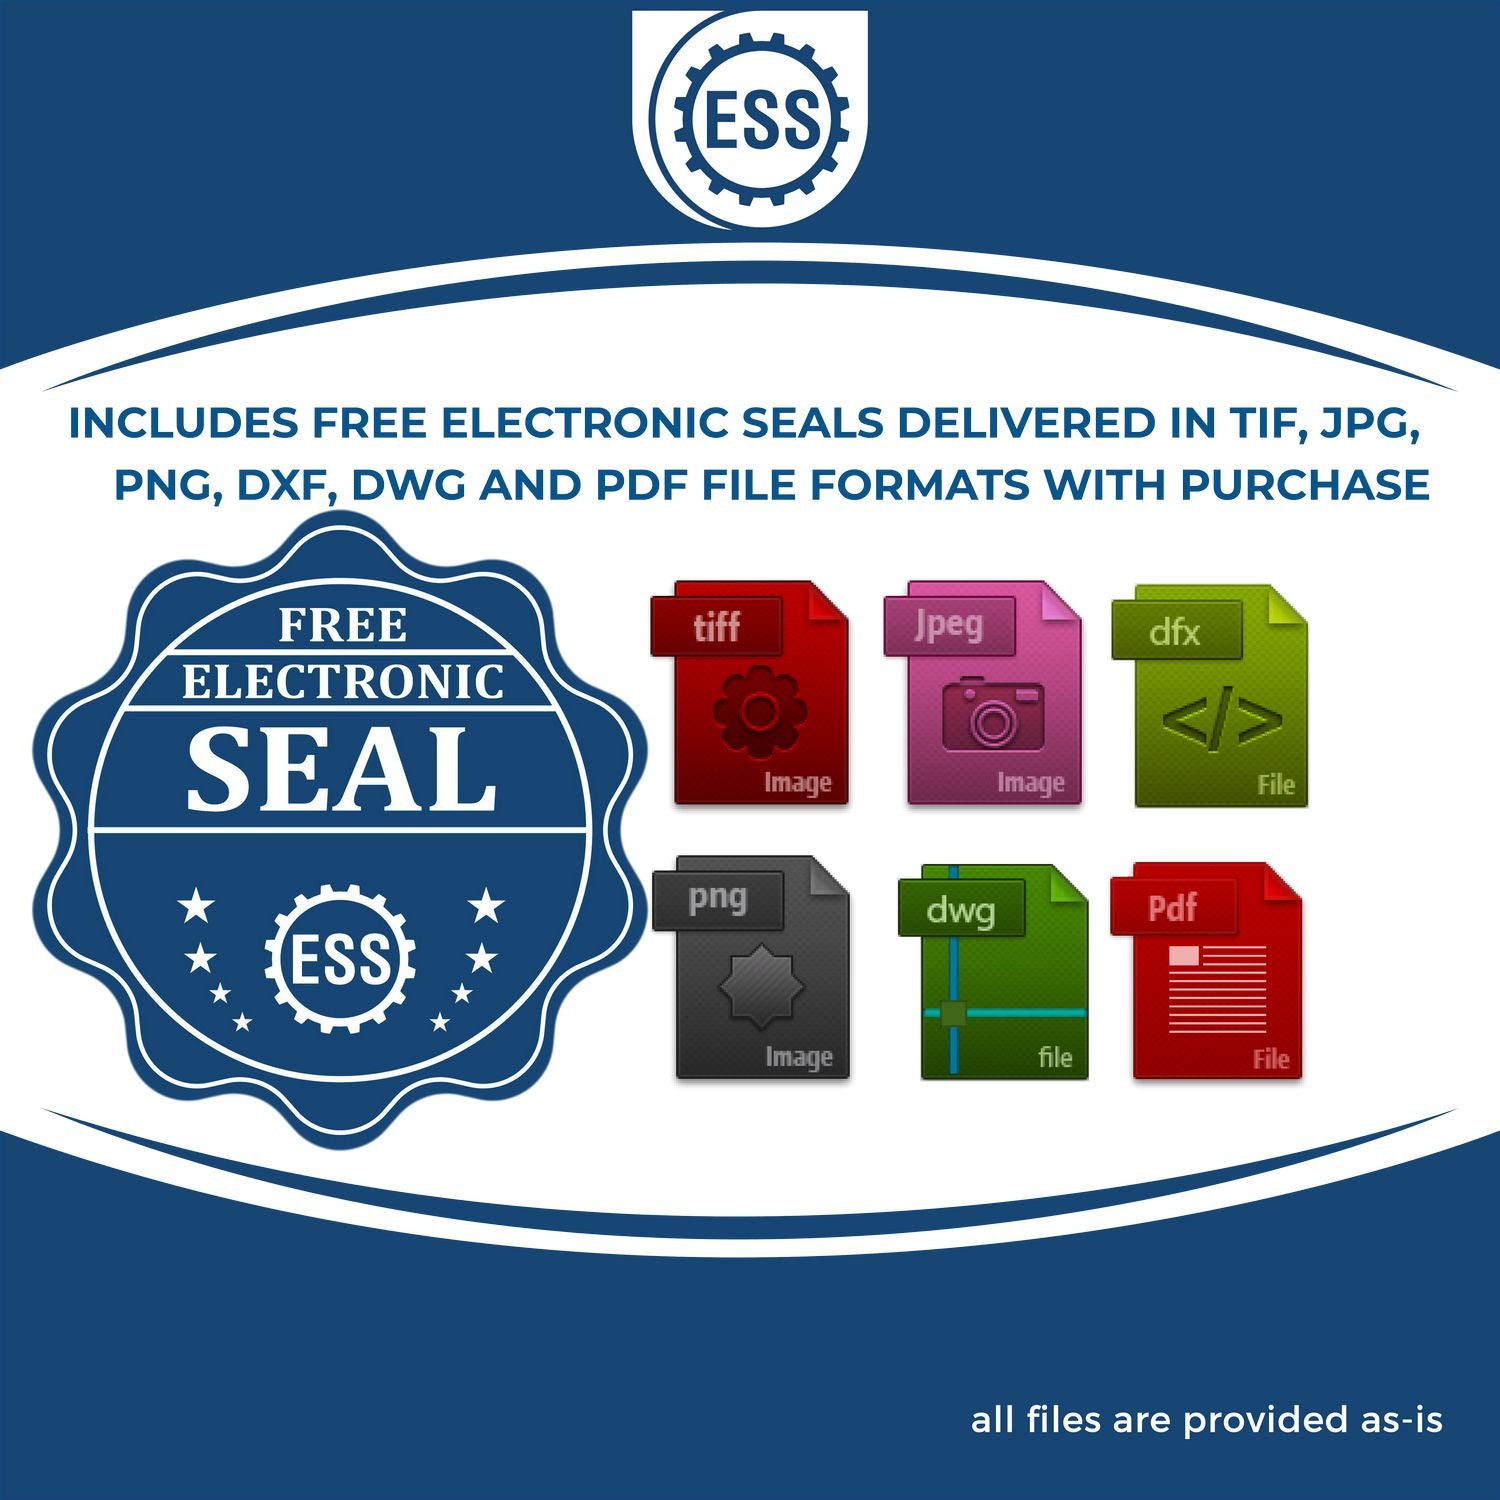 An infographic for the free electronic seal for the Self-Inking Connecticut Landscape Architect Stamp illustrating the different file type icons such as DXF, DWG, TIF, JPG and PNG.